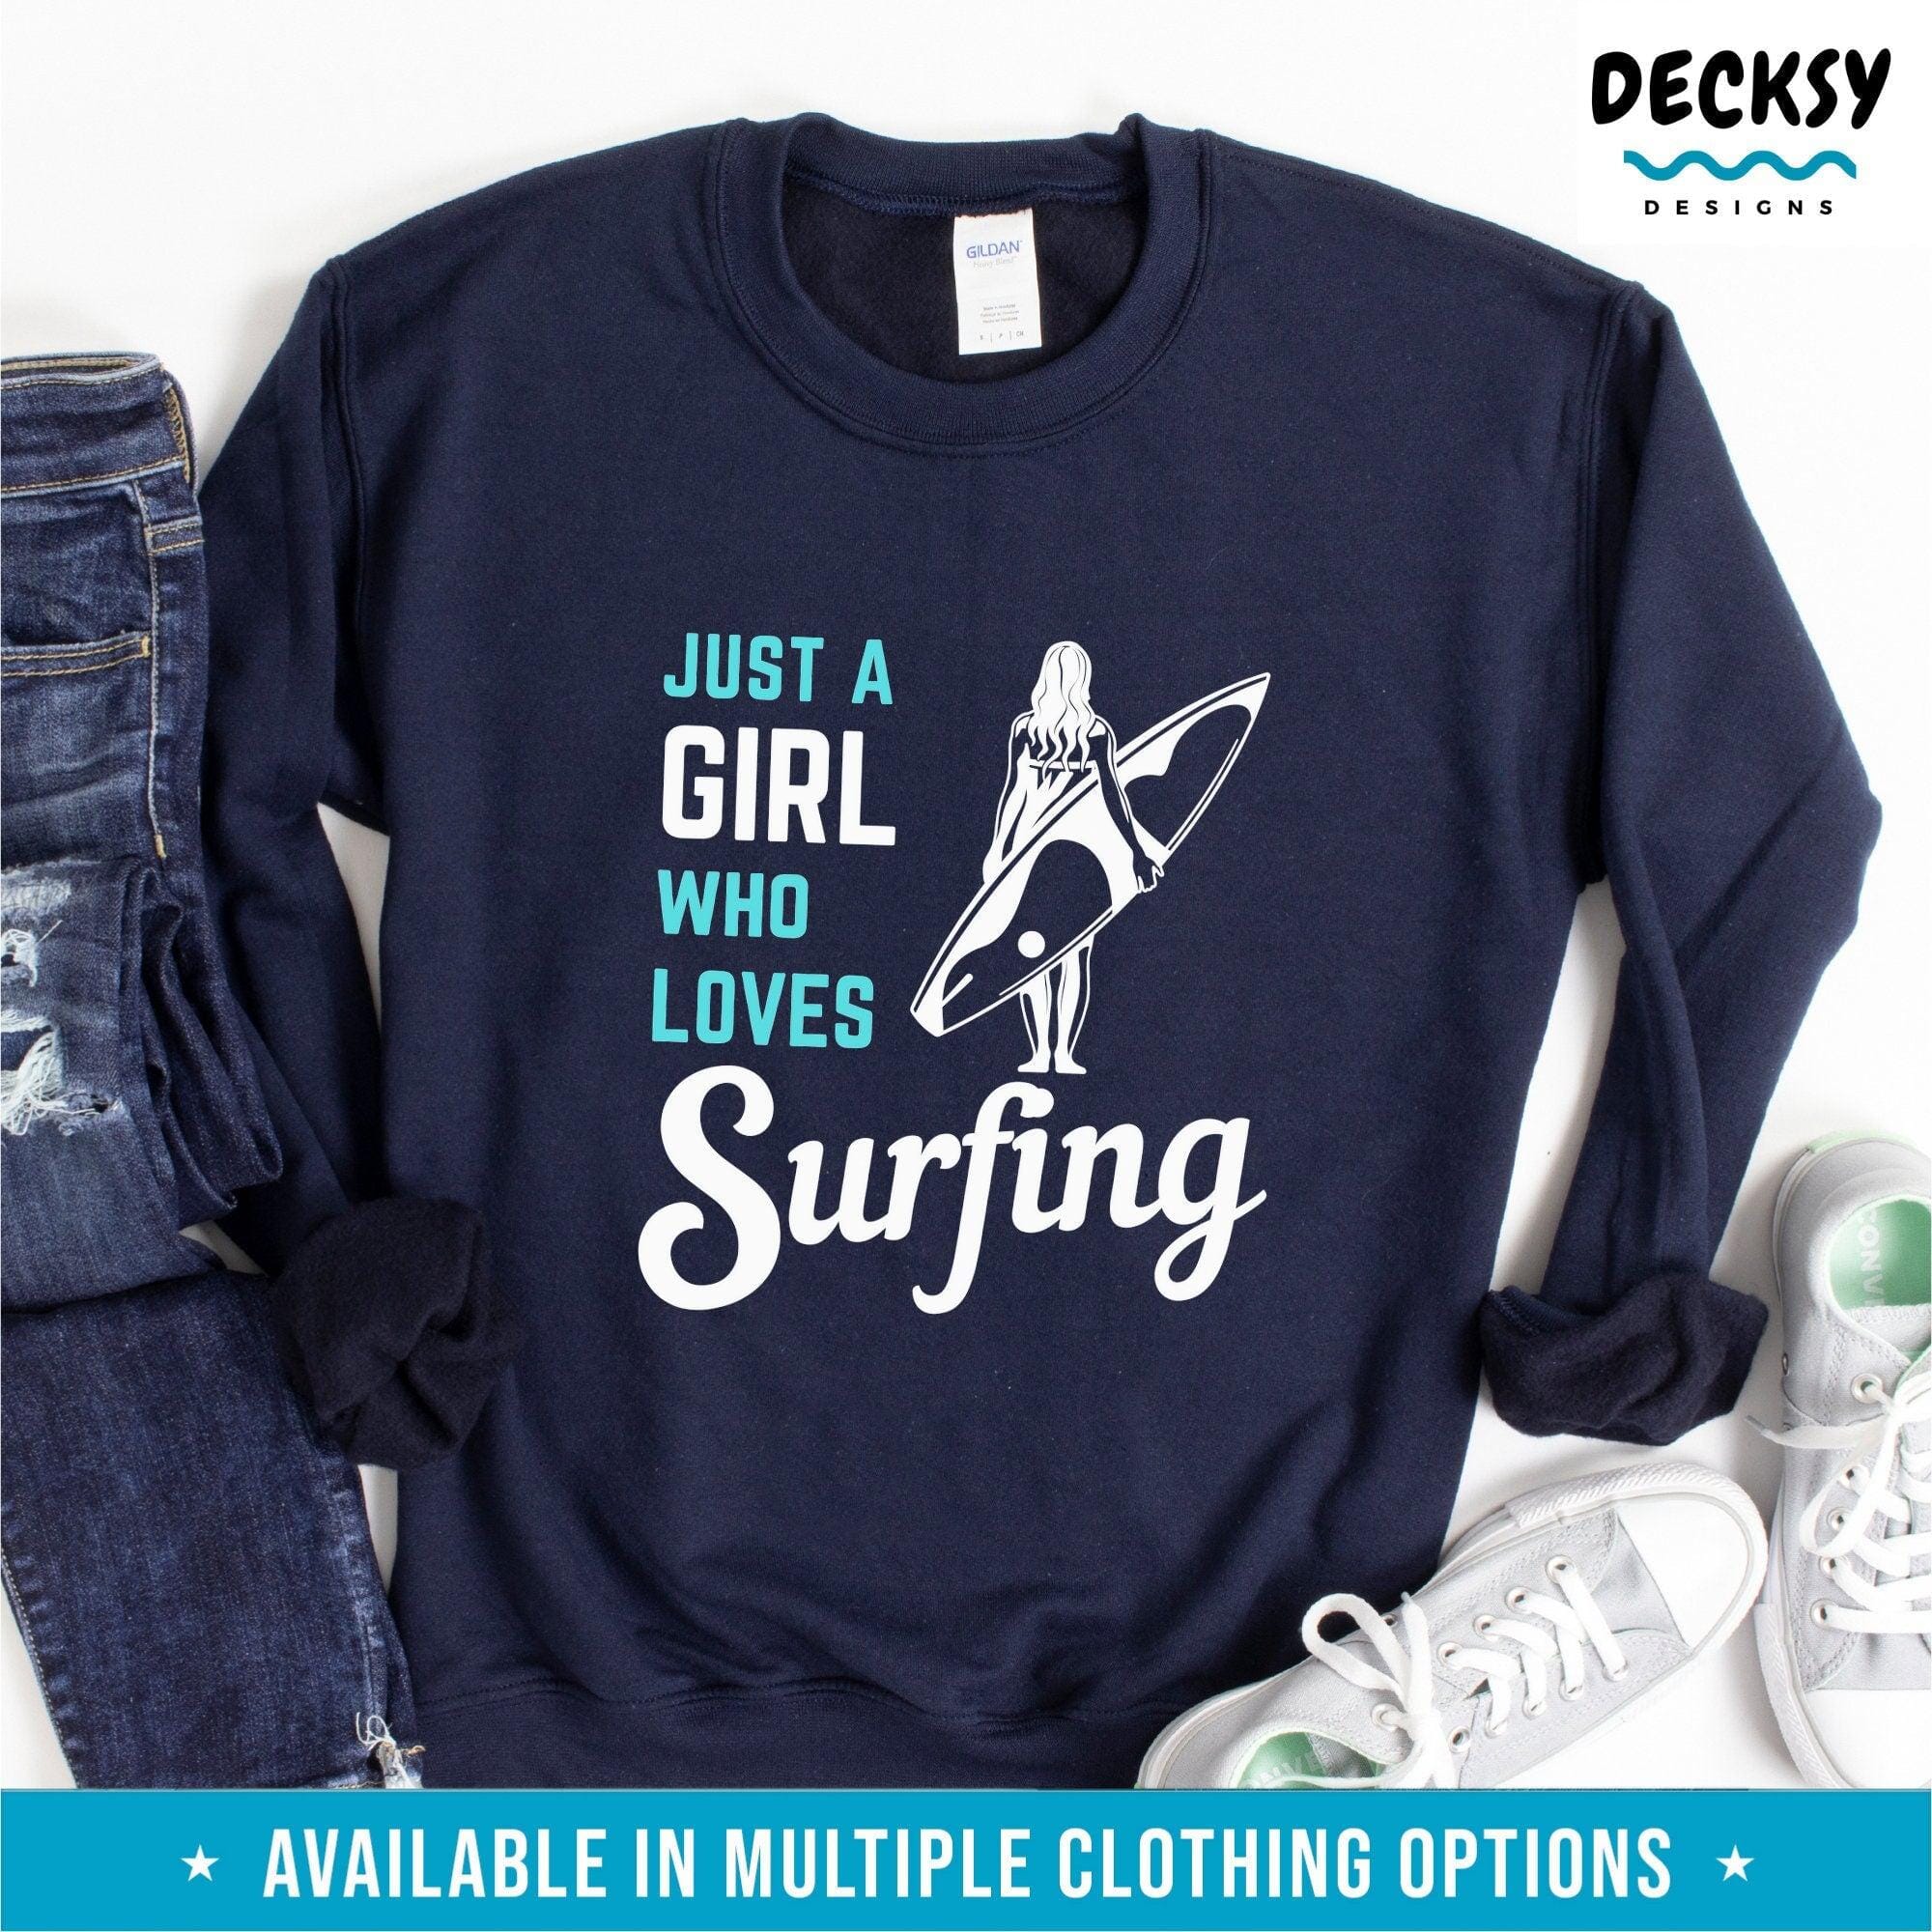 Surfer Girl Shirt, Beach Surf Gift For Her-Clothing:Gender-Neutral Adult Clothing:Tops & Tees:T-shirts:Graphic Tees-DecksyDesigns